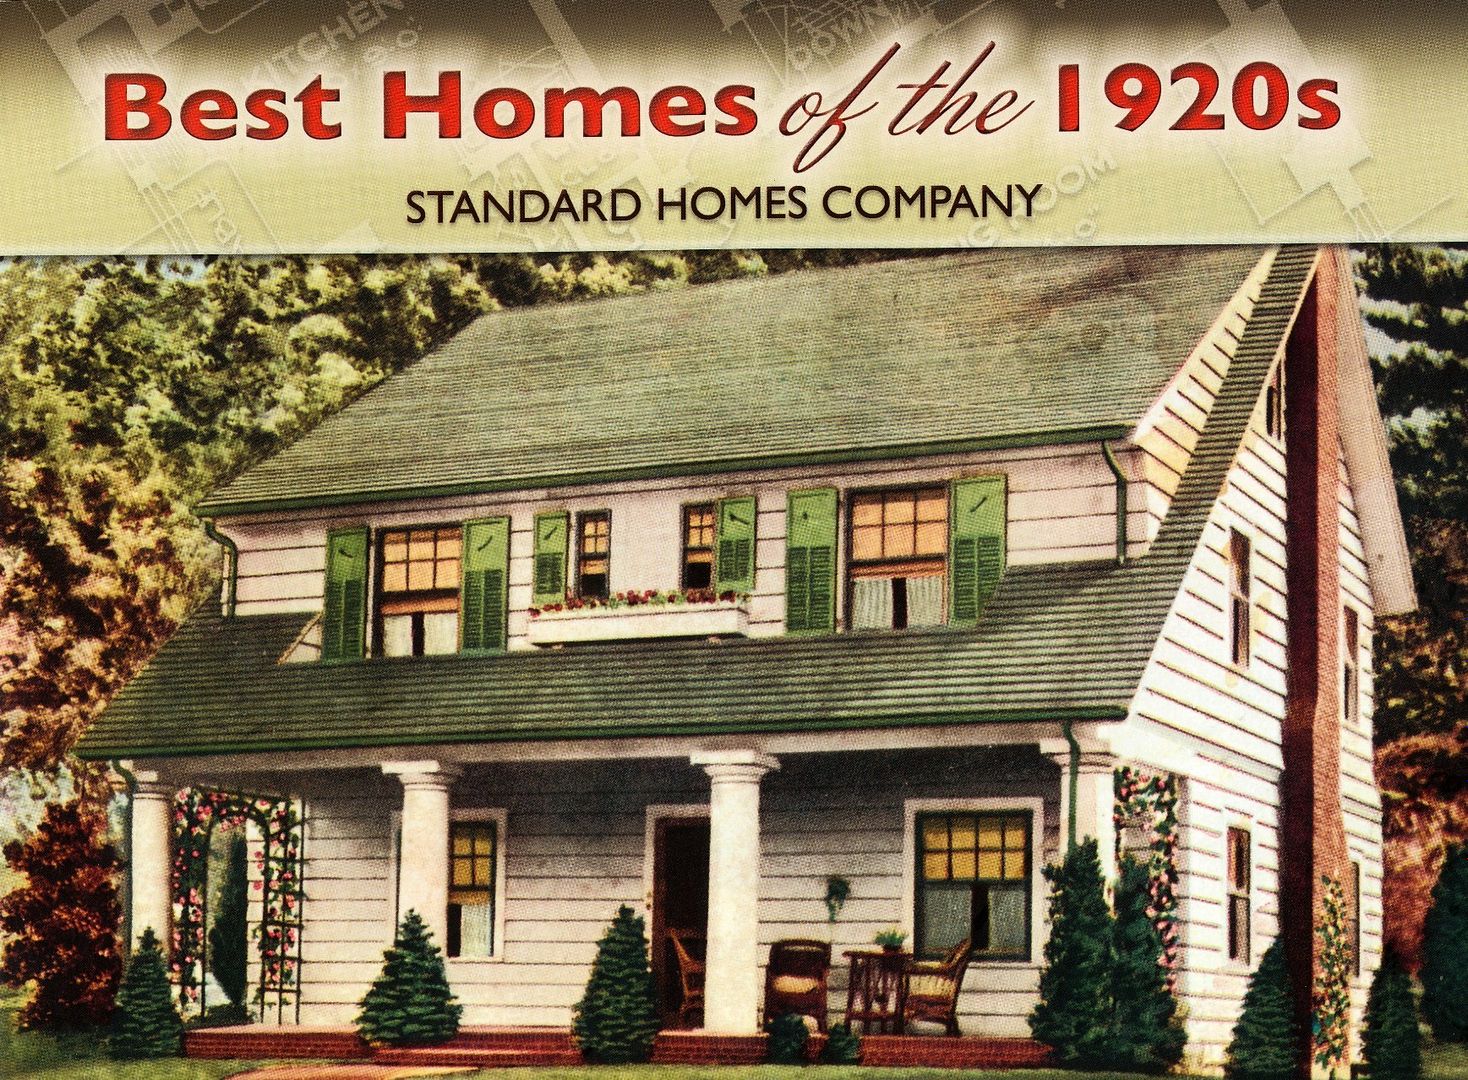 I found Bobs house in this reproduction of a 1920s Standard Home Plans catalog. I bought it a few years ago on Amazon. And I love that design on the front cover. 